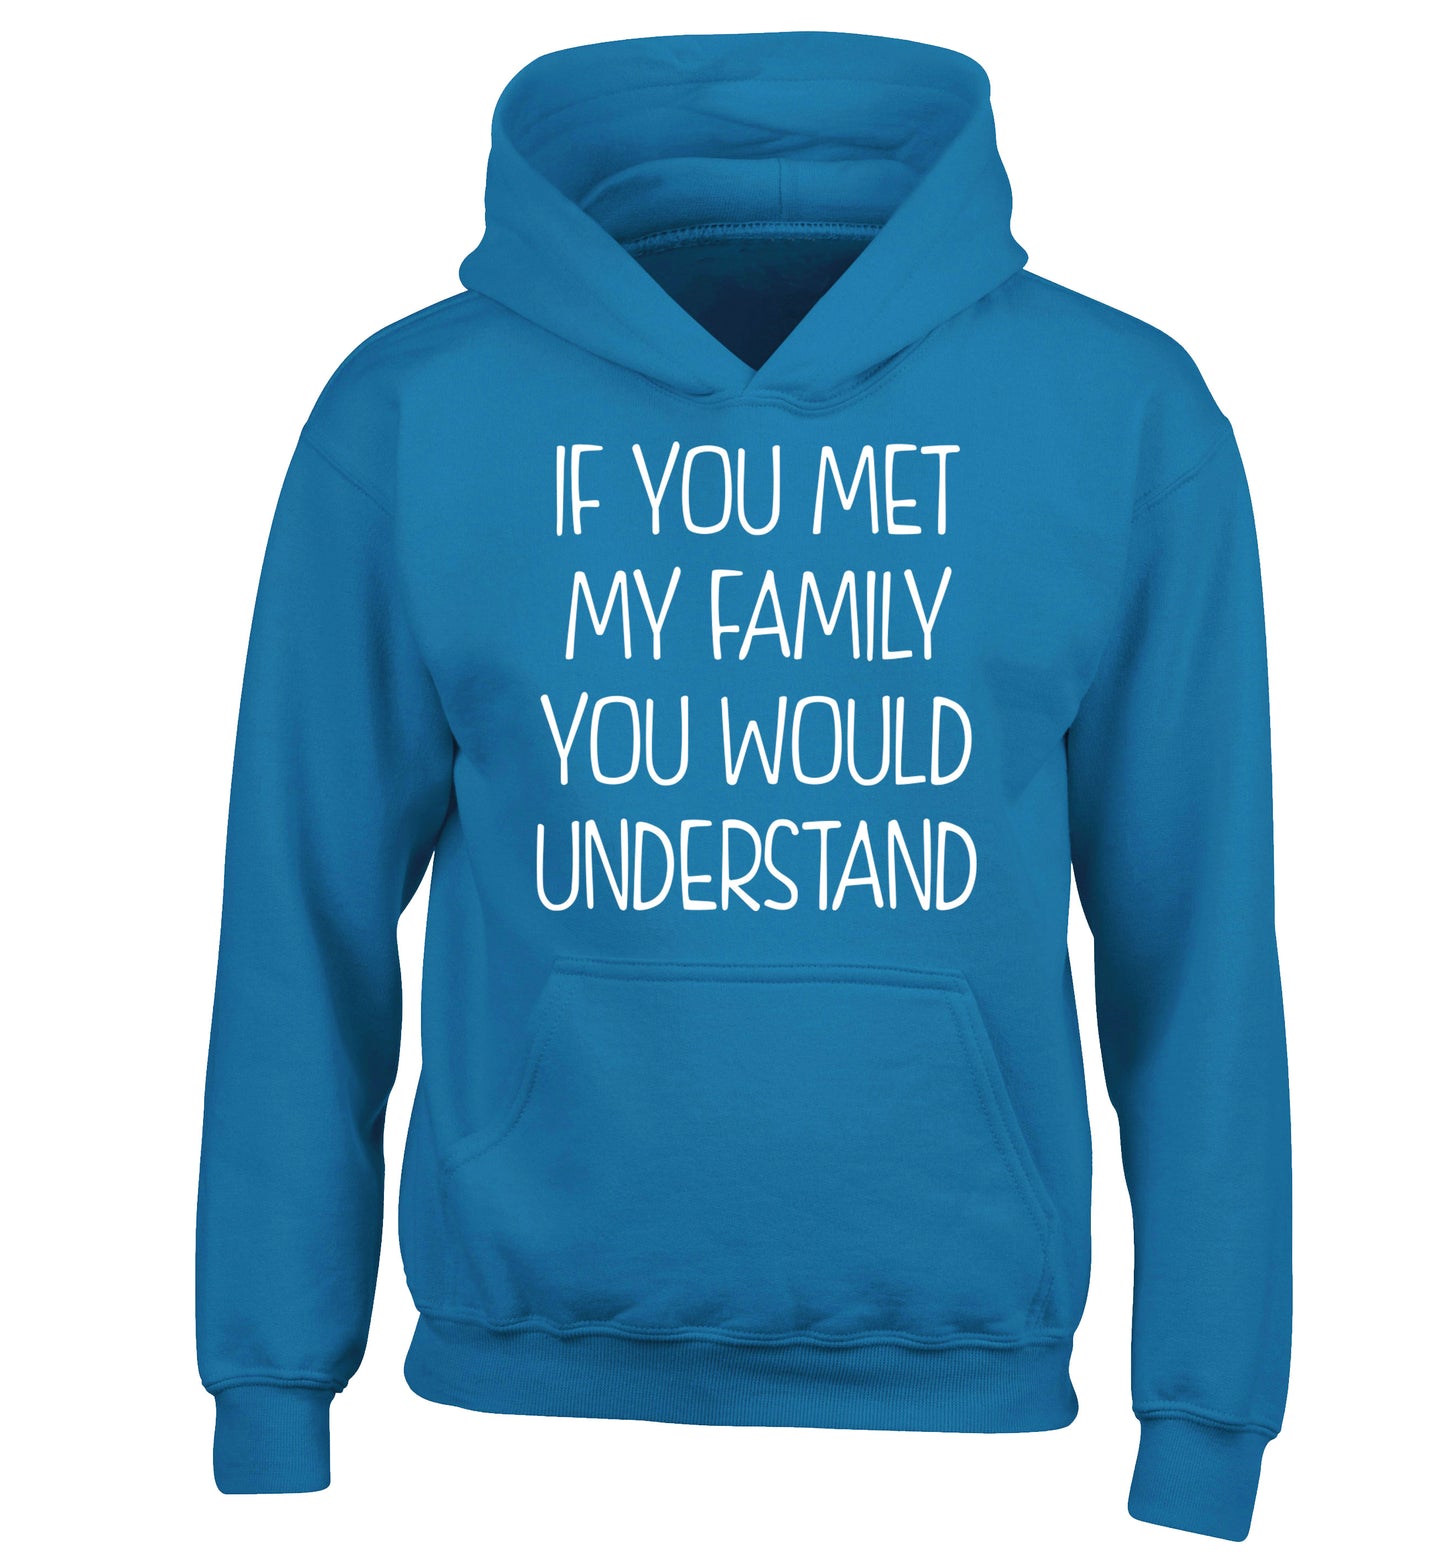 If you met my family you would understand children's blue hoodie 12-13 Years